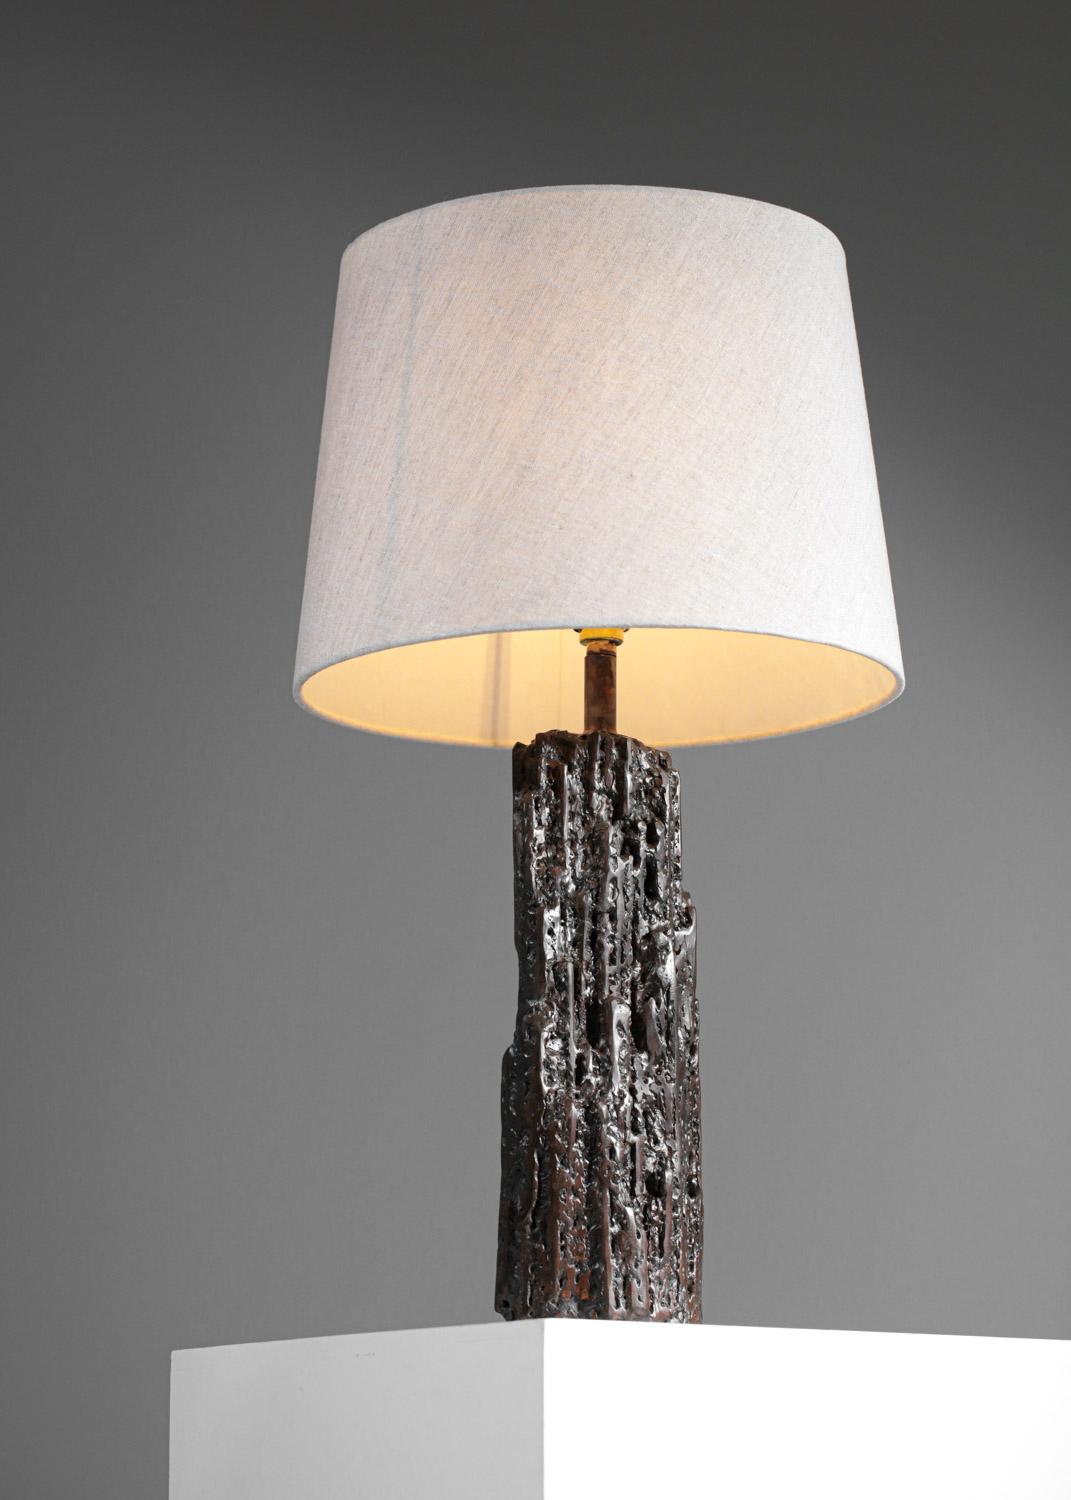 This table lamp in a brutalist style was created by the artist Donna. Its imposing base in patinated metal was handmade and requires a unique meticulous and precise work. Designer sober, elegant and very decorative. Presence of the artist's